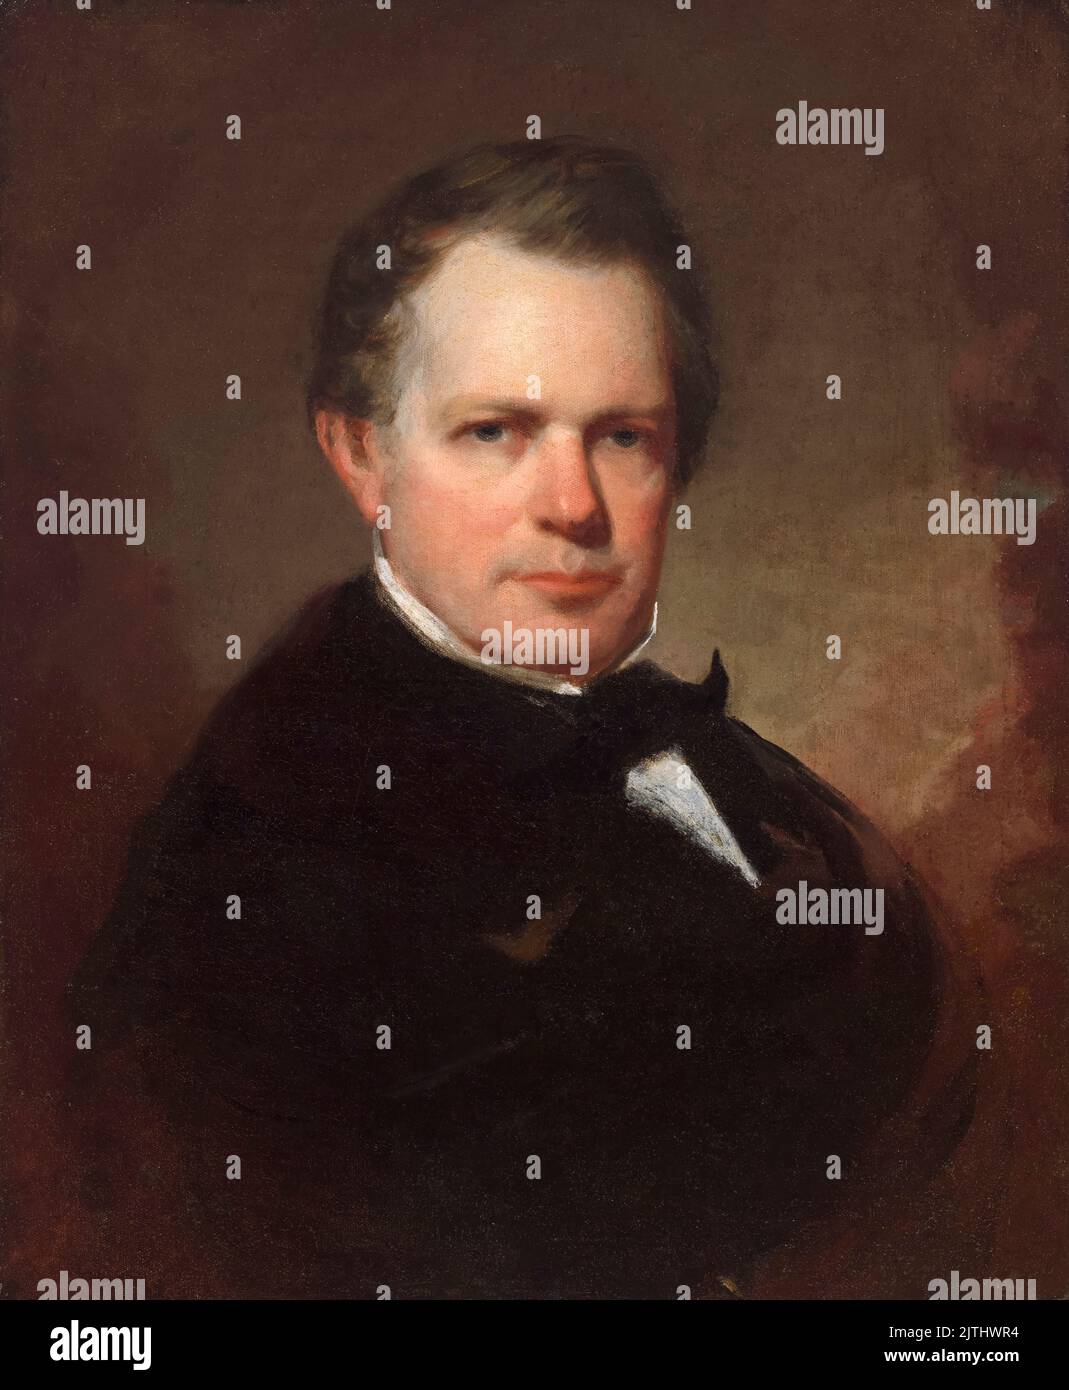 William Gilmore Simms (1806-1870), American writer and politician from the American South a staunch defender of slavery, portrait painting in oil on canvas before 1870 Stock Photo